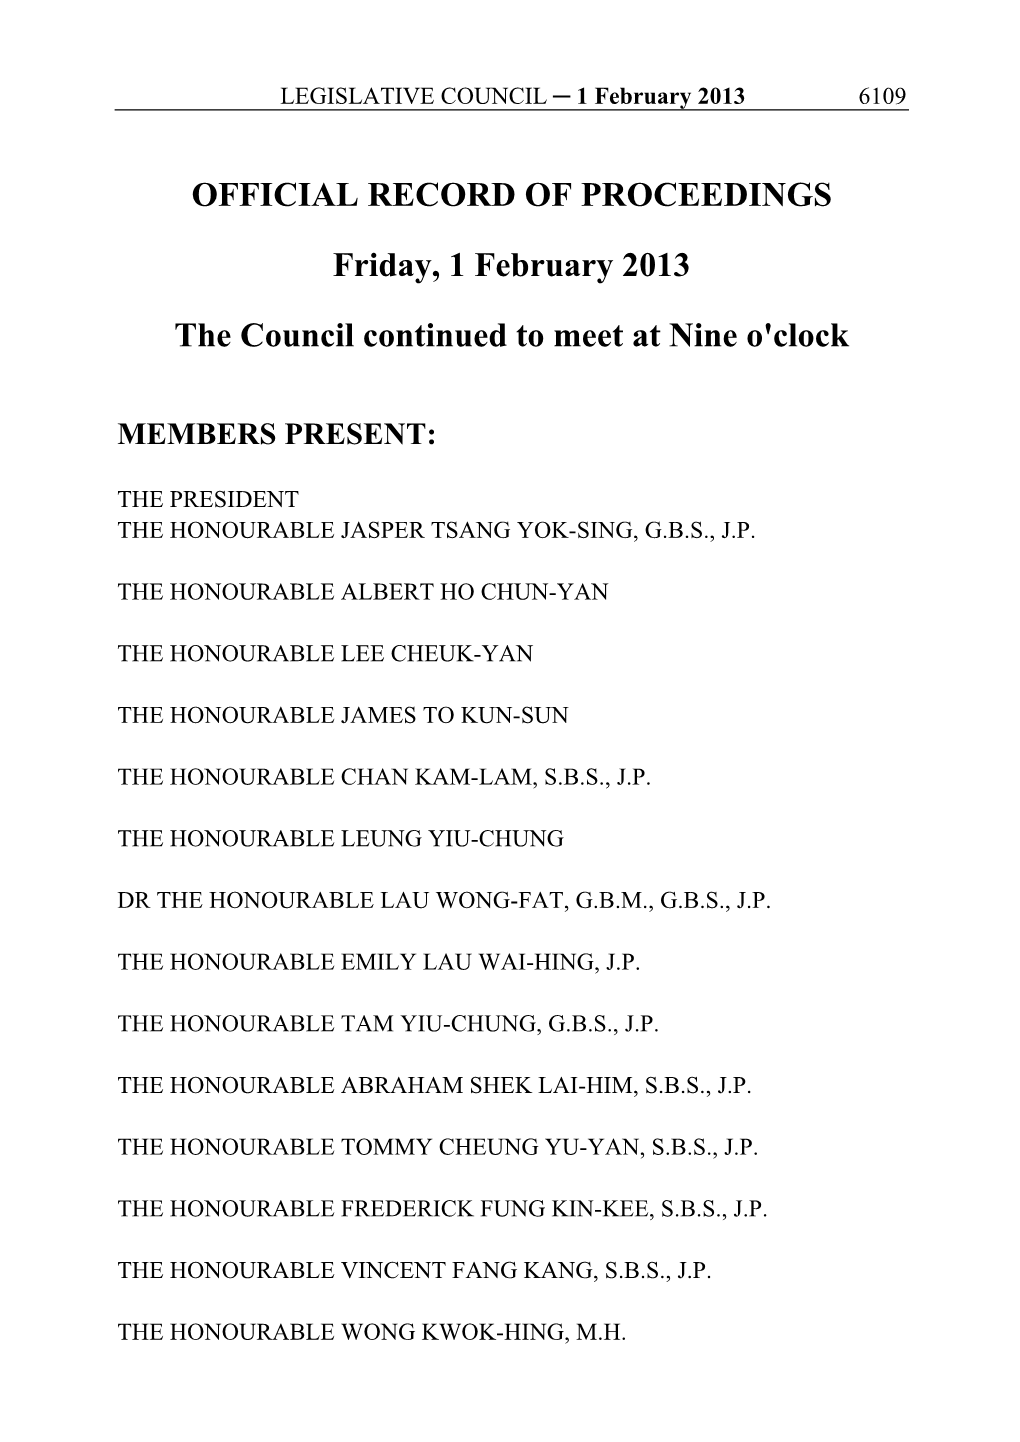 OFFICIAL RECORD of PROCEEDINGS Friday, 1 February